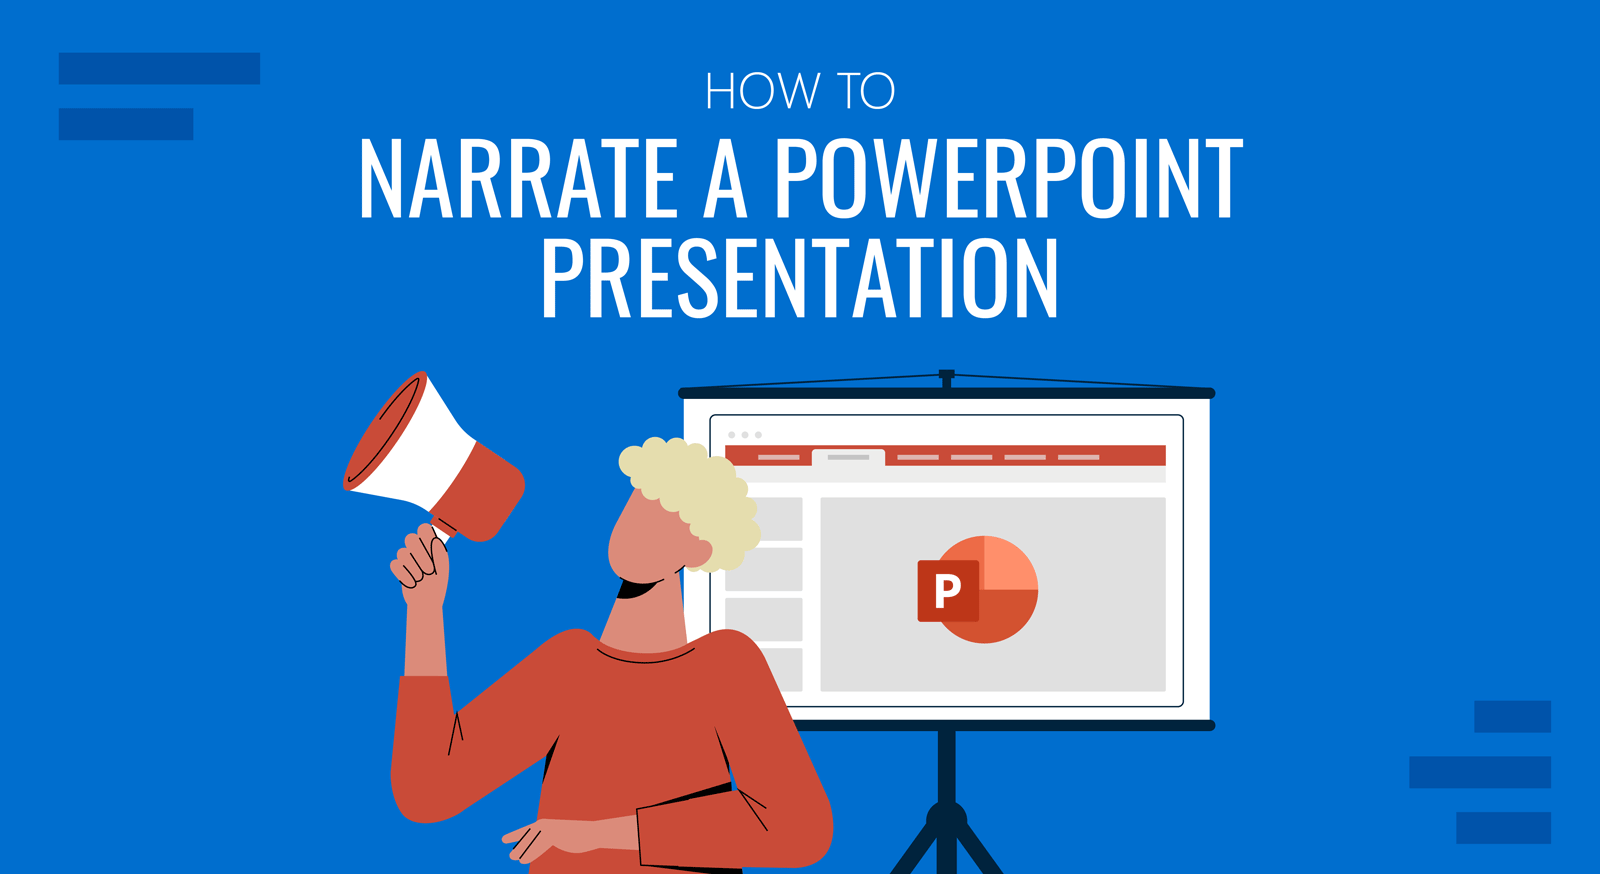 how-to-narrate-a-powerpoint-presentation-with-2-different-methods